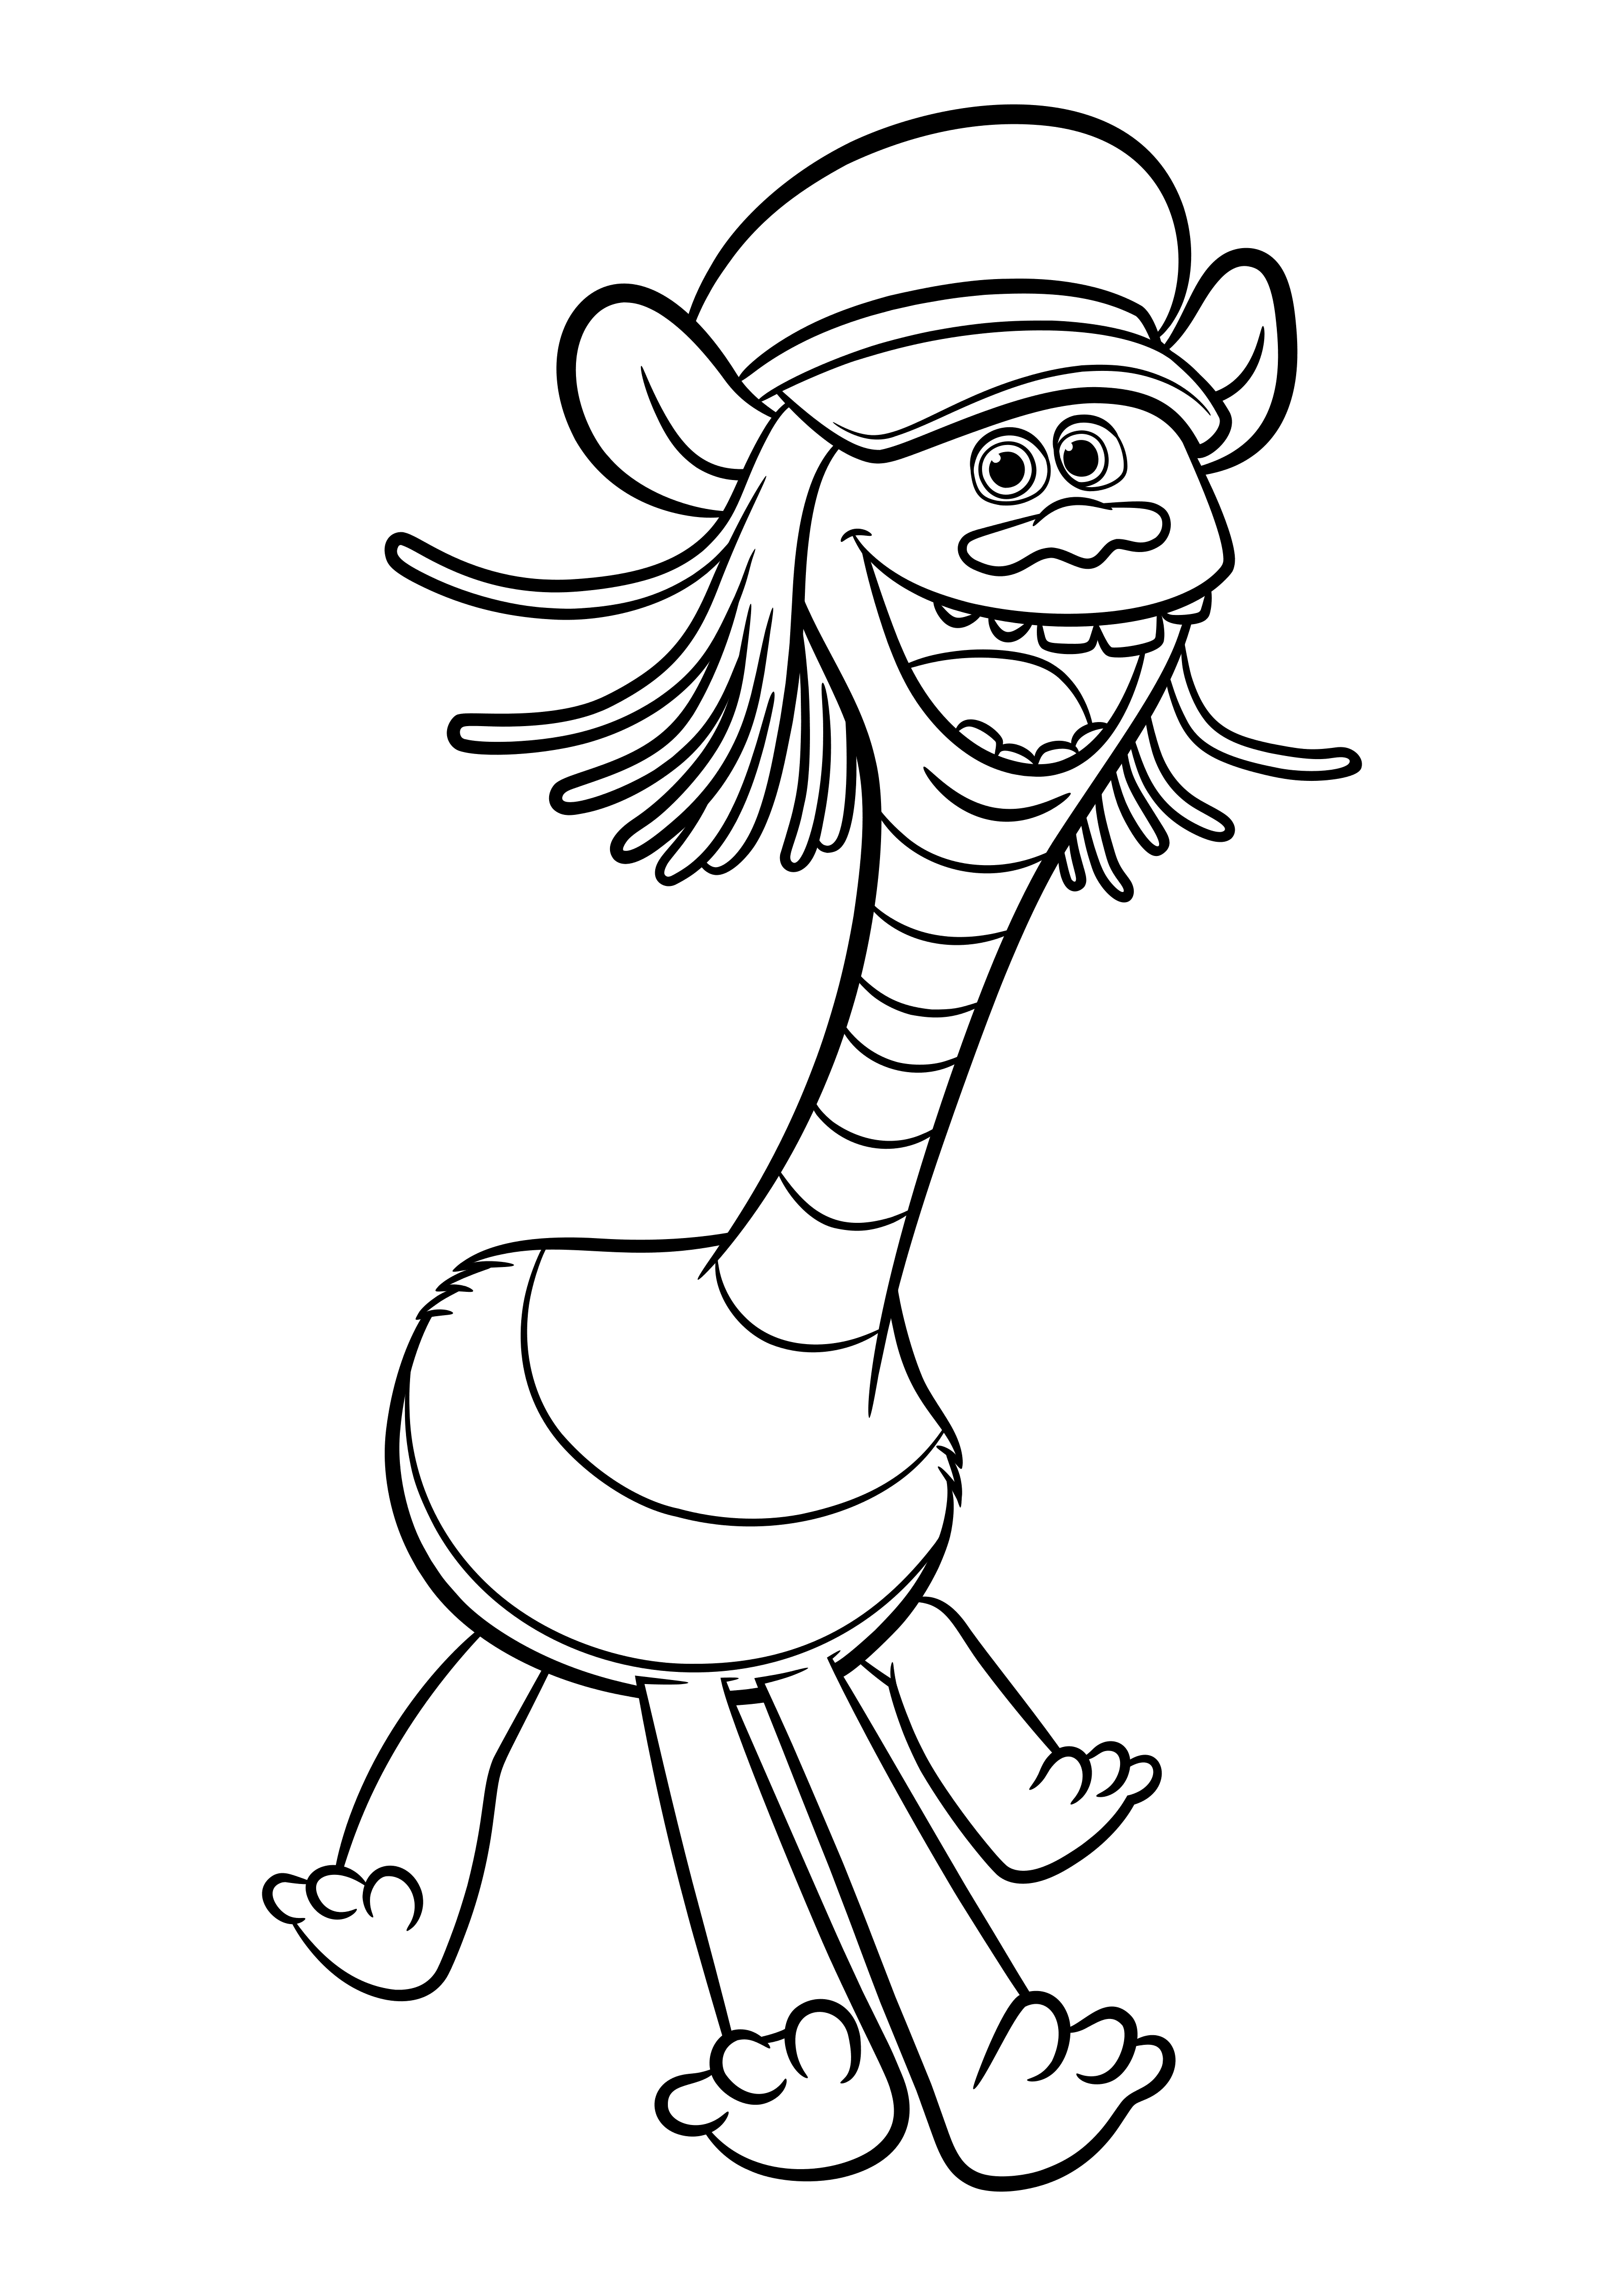 Trolls Coloring pages to download and print for free